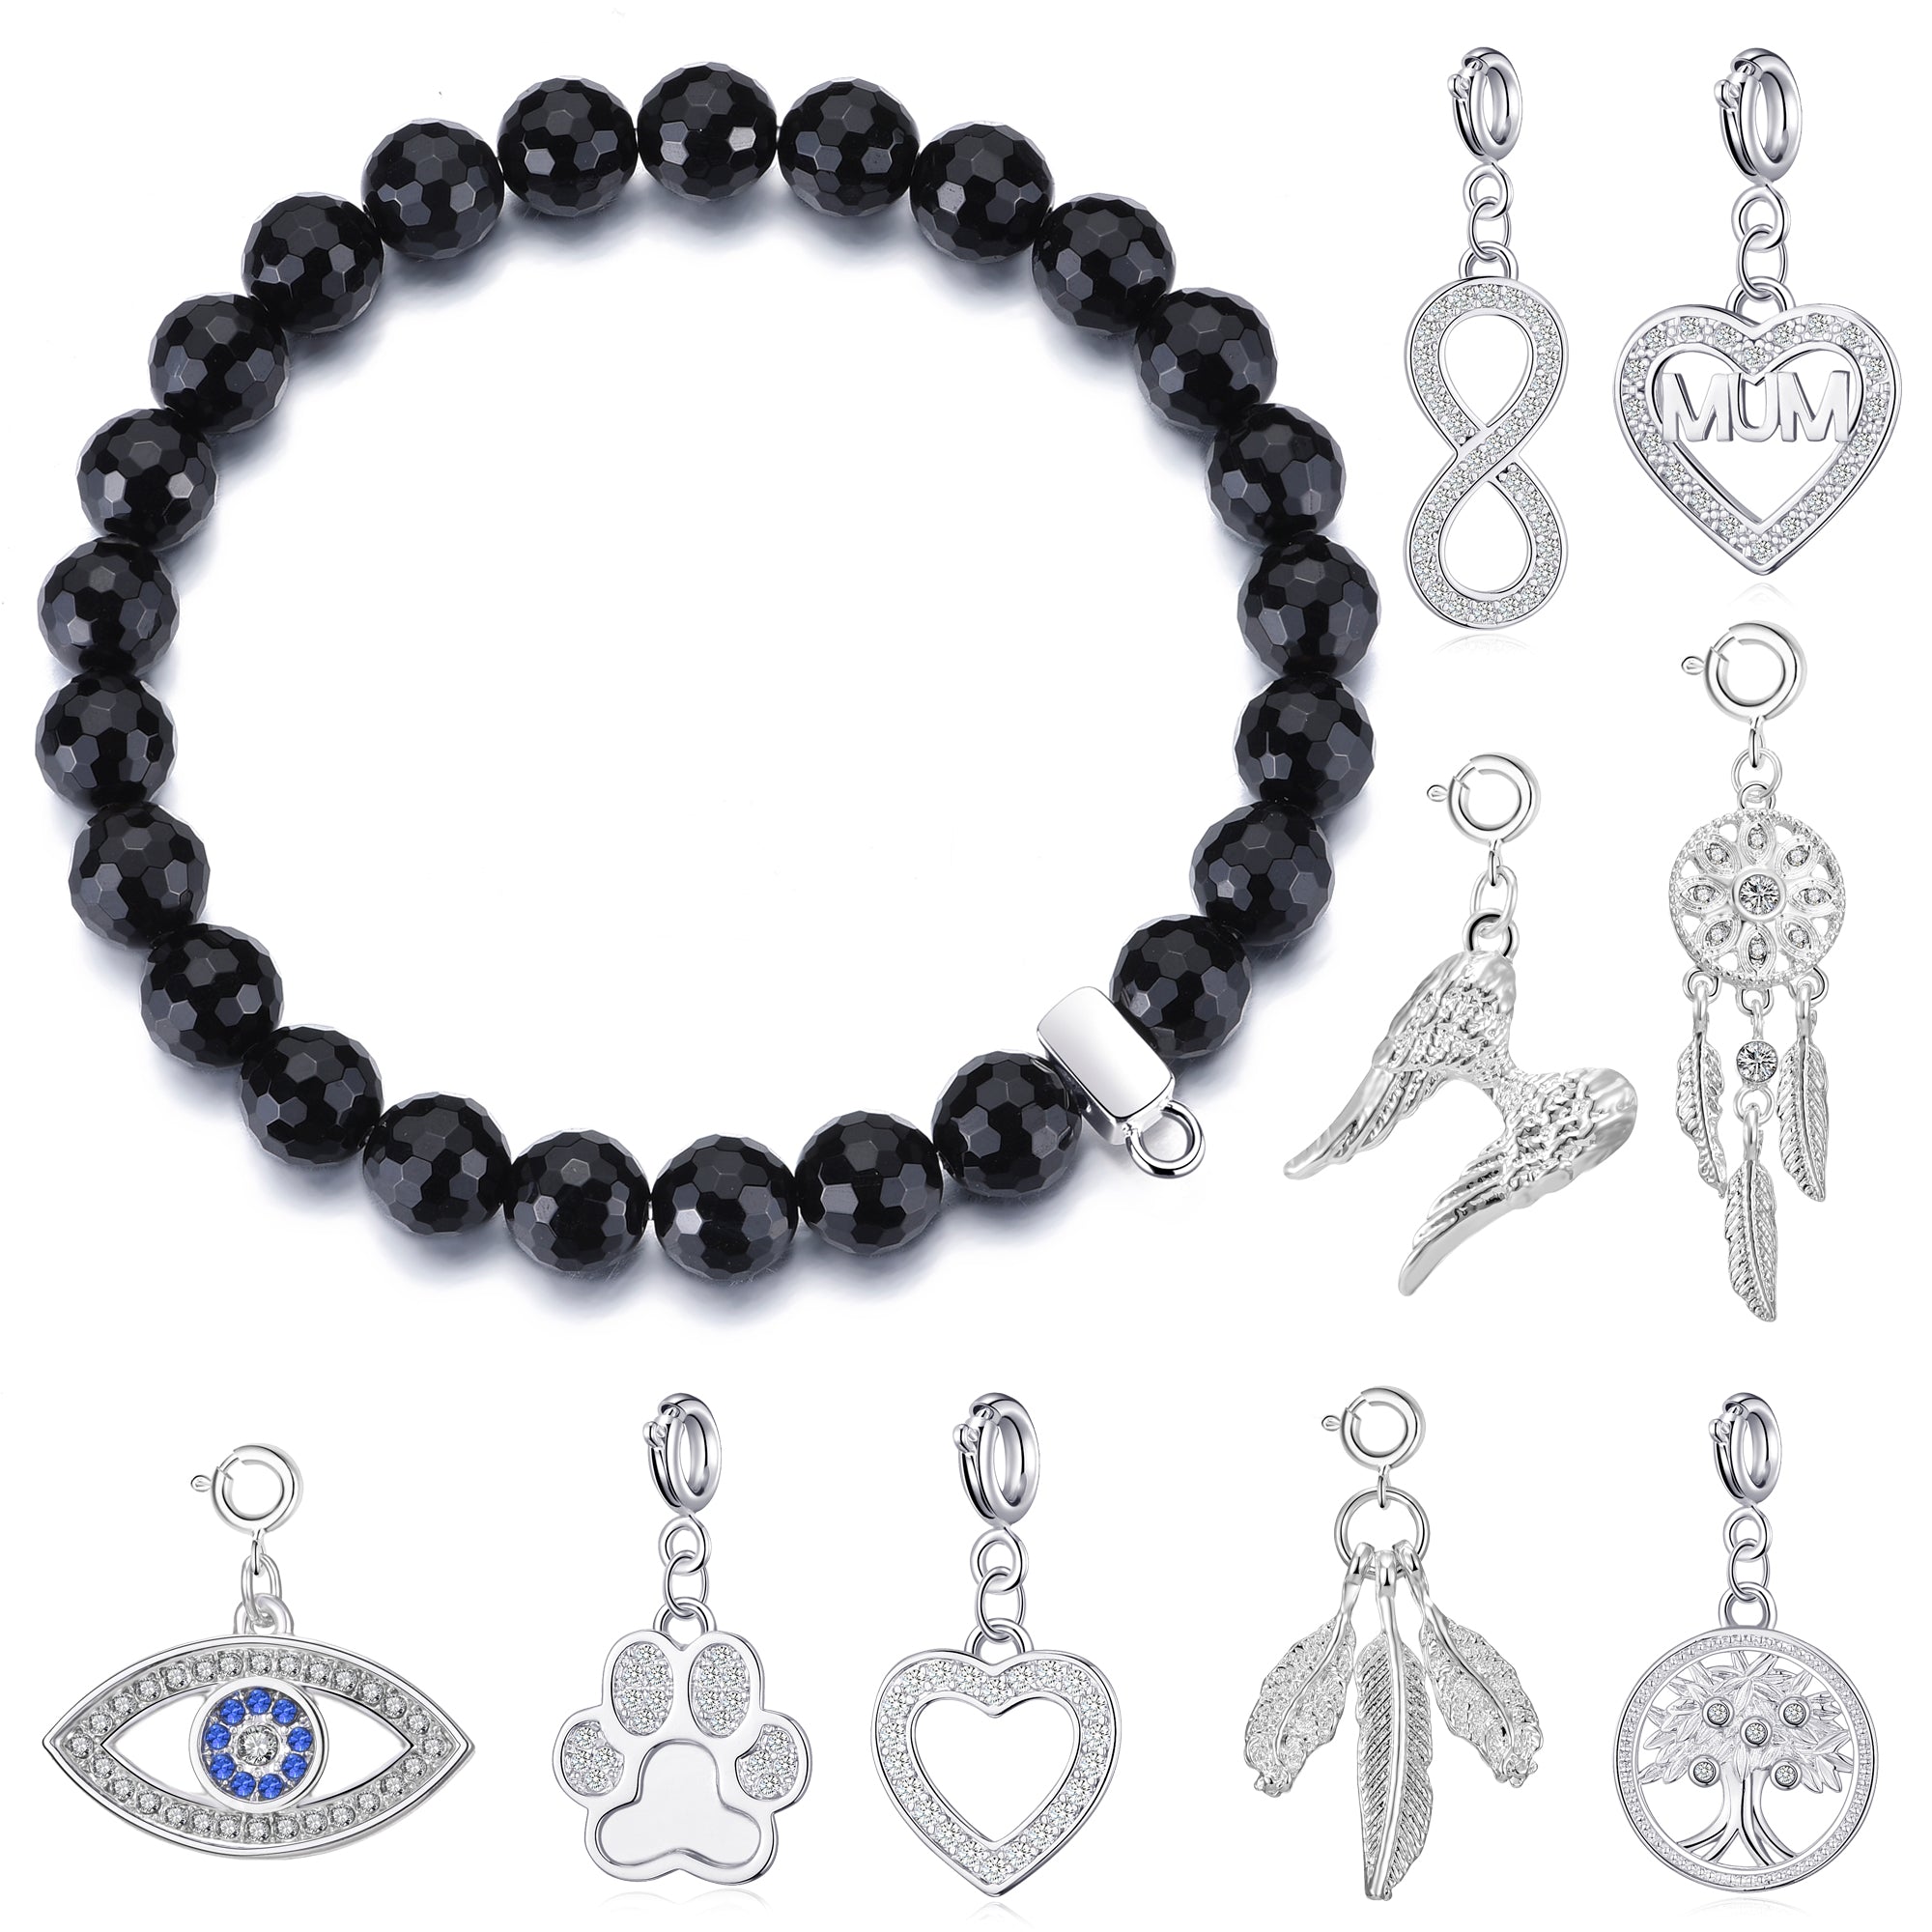 Faceted Black Onyx Gemstone Bracelet with Charm Created with Zircondia® Crystals